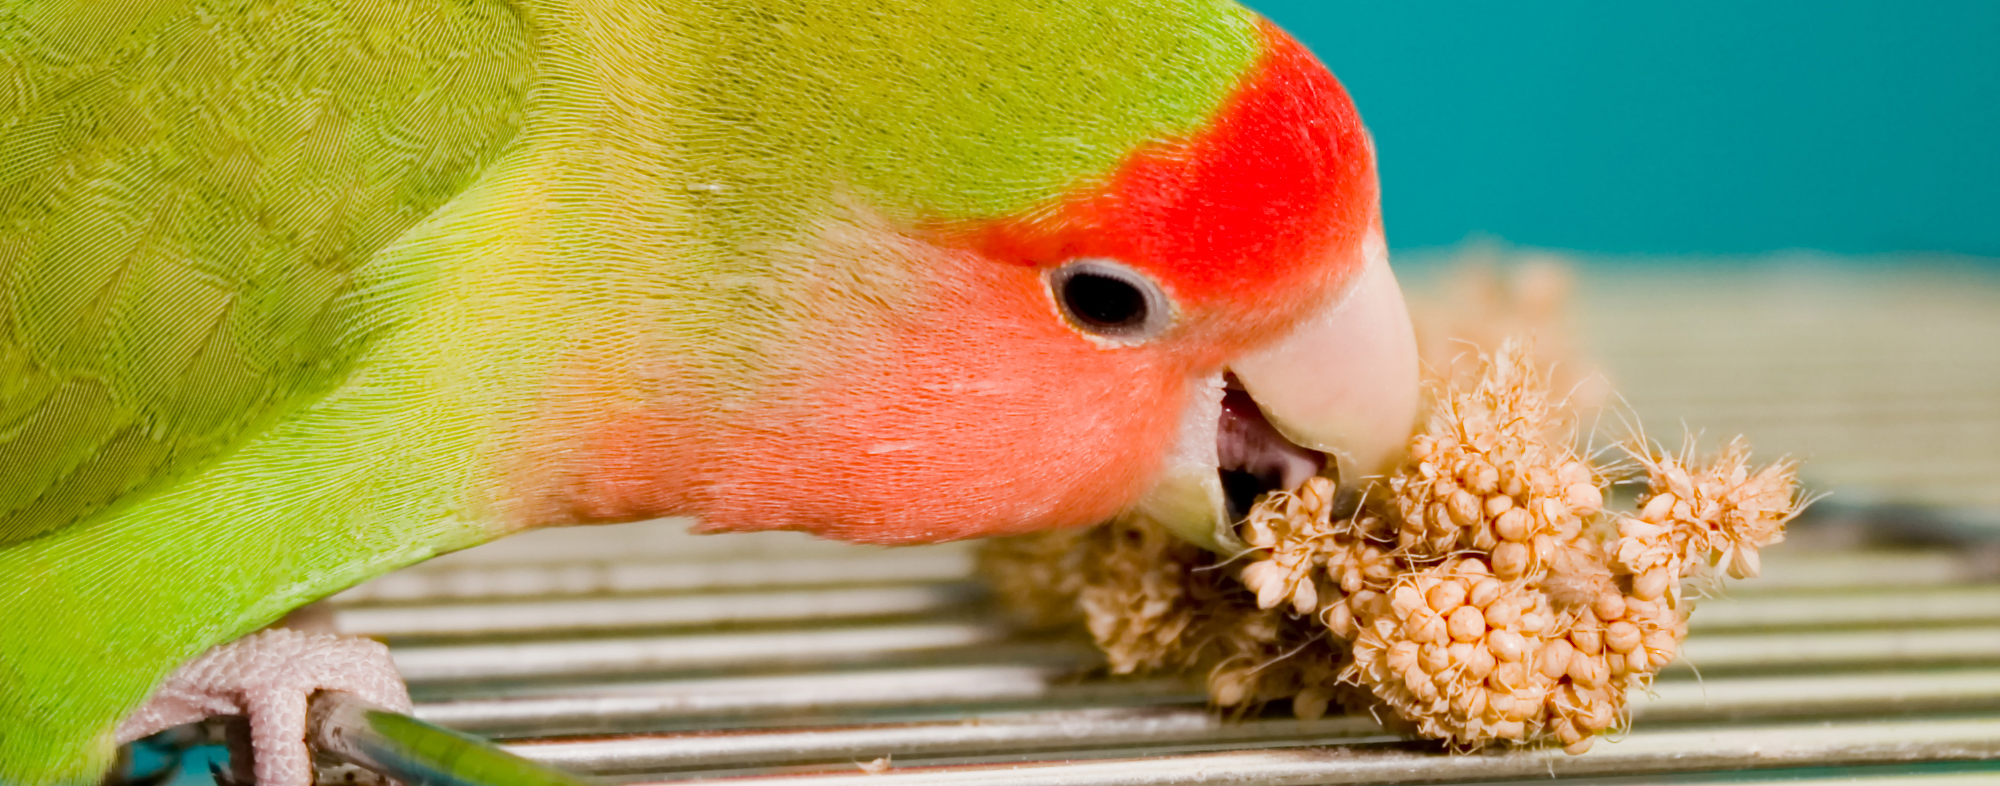 An excited pet parrot licking a bunch of berries with its beak